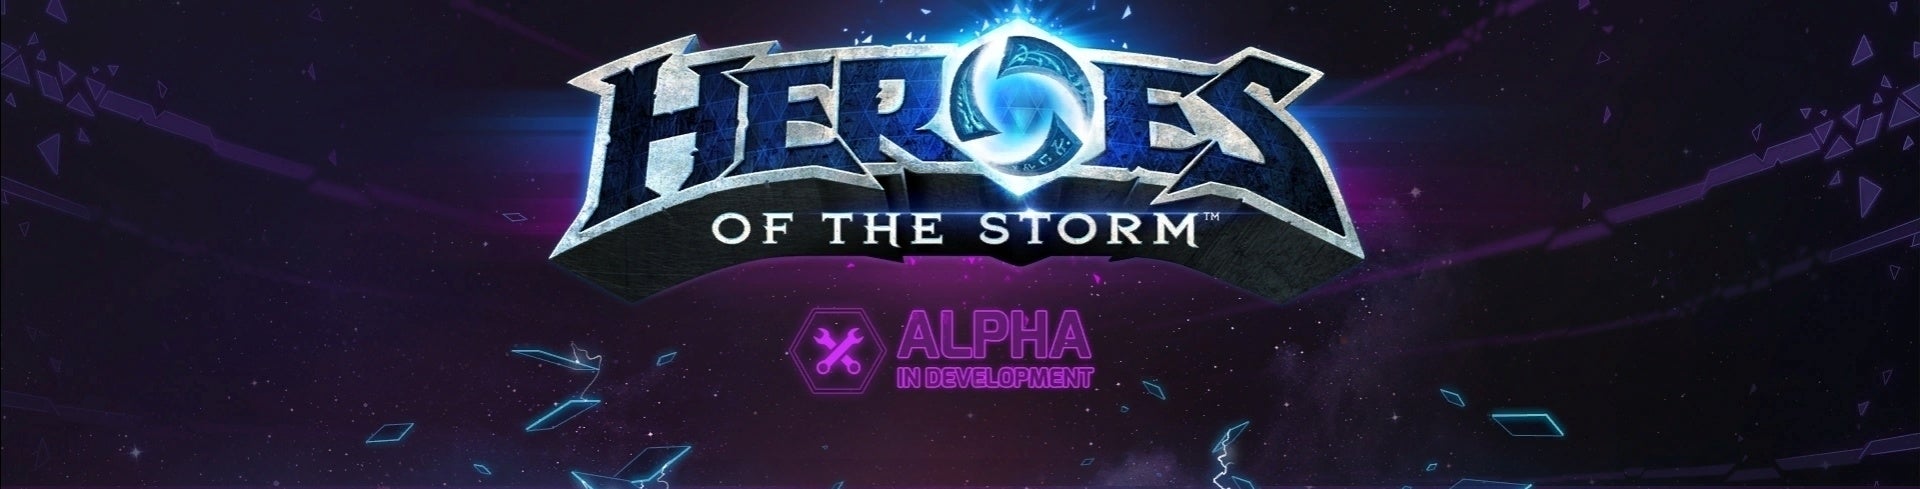 Image for Heroes of the Storm: Blizzard's long road to reinventing the wheel